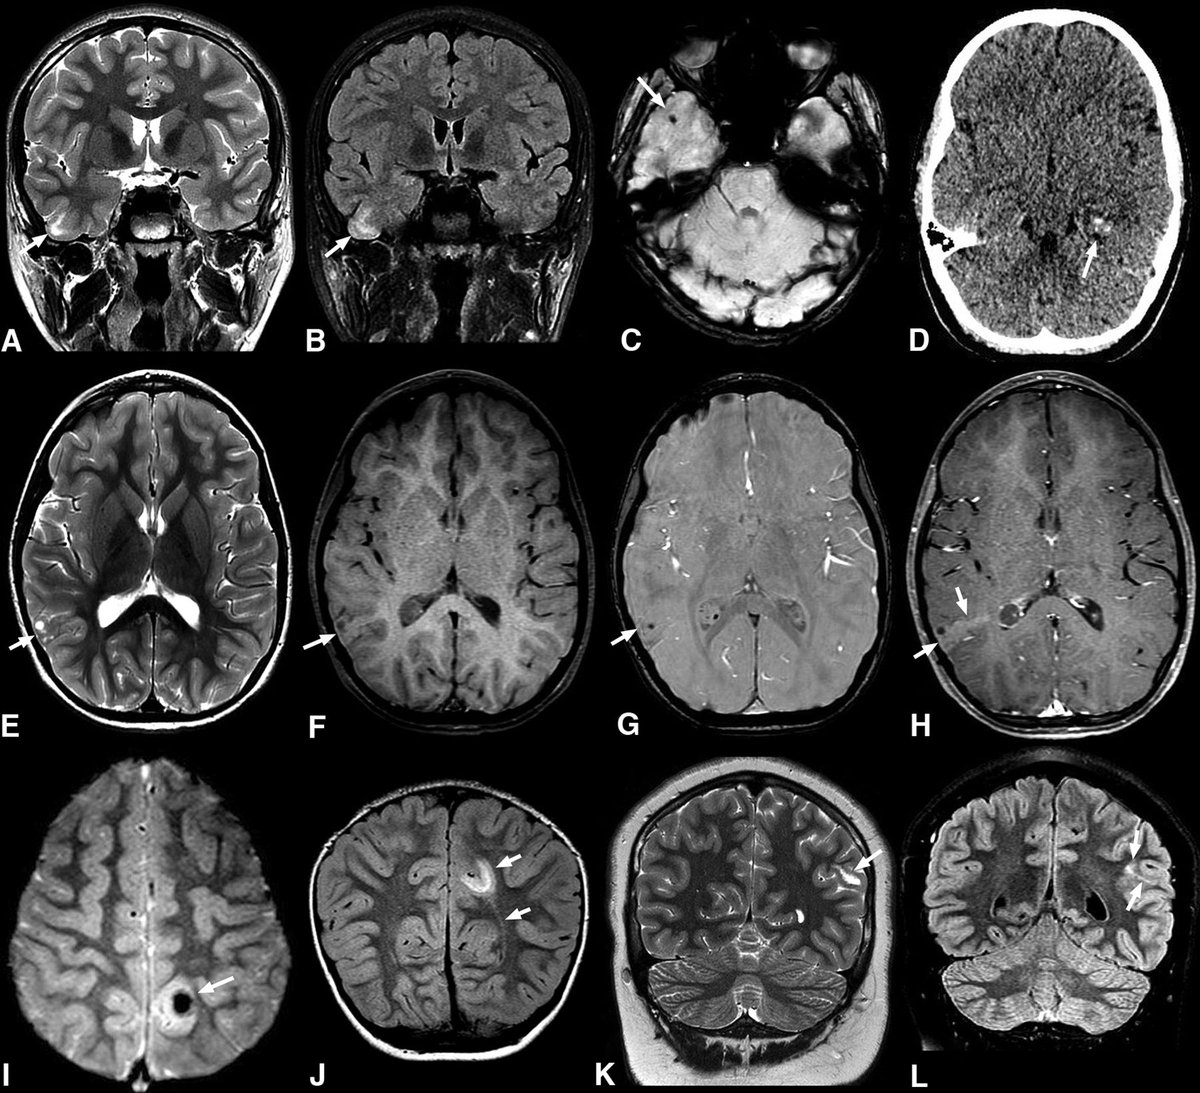 Expanding the Imaging Spectrum of Polymorphous Low-Grade Neuroepithelial Tumor of the Young in Children ajnr.org/content/early/… @CHOPRadiology @crcerron @Fab_Neuroradio @luisoctaviotg and Dr. Vossough @TheAJNR @theAJNR_EIC